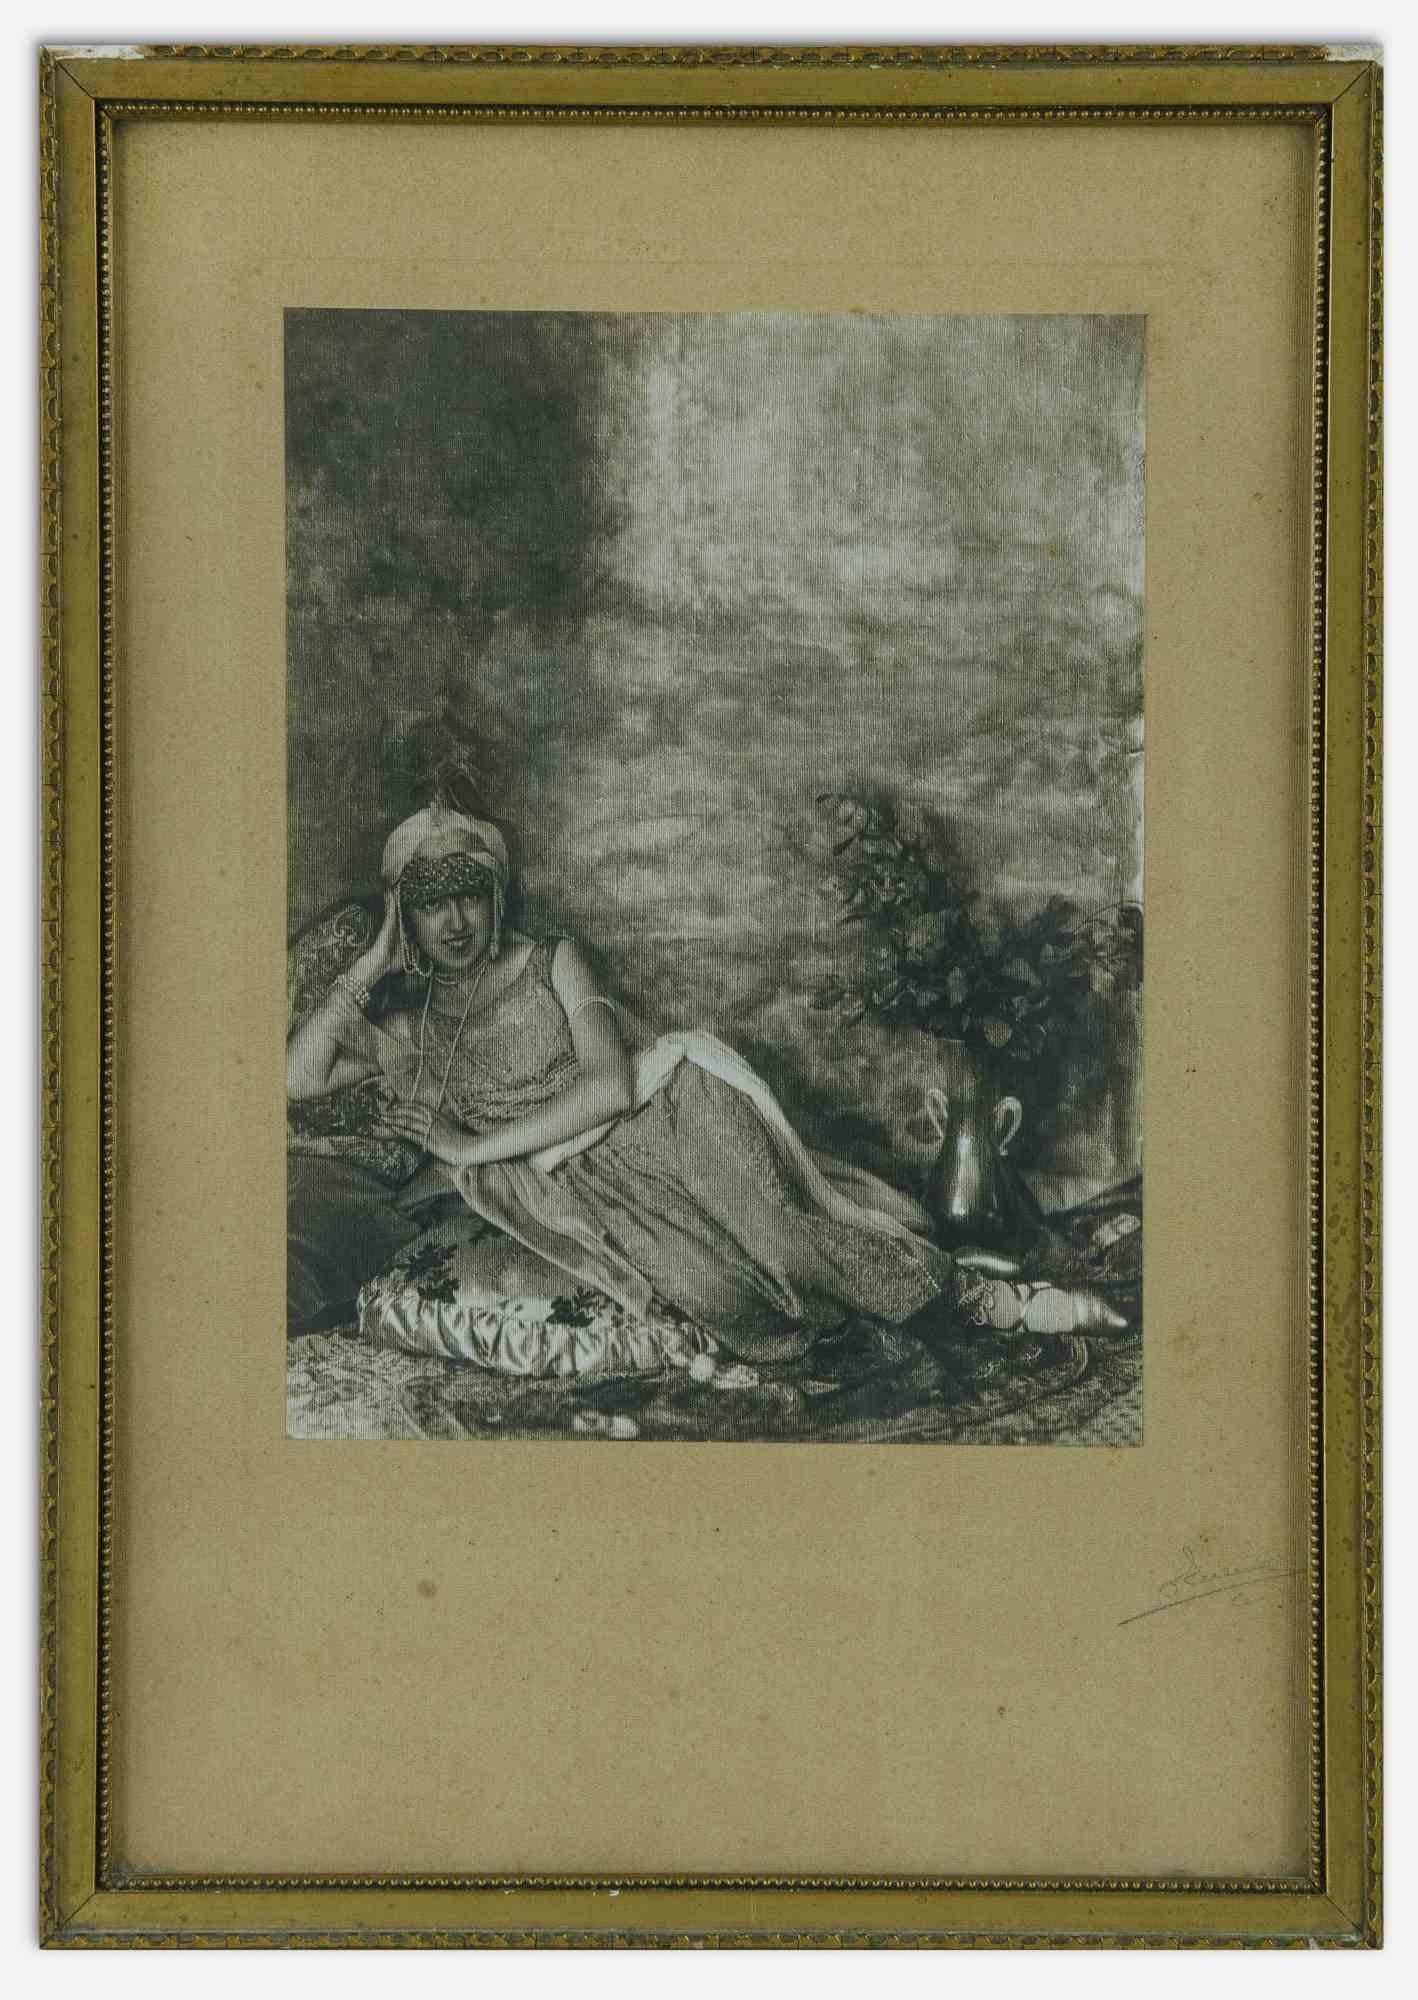 Unknown Black and White Photograph - Arabic Girl -  Photograph - Early 20th Century